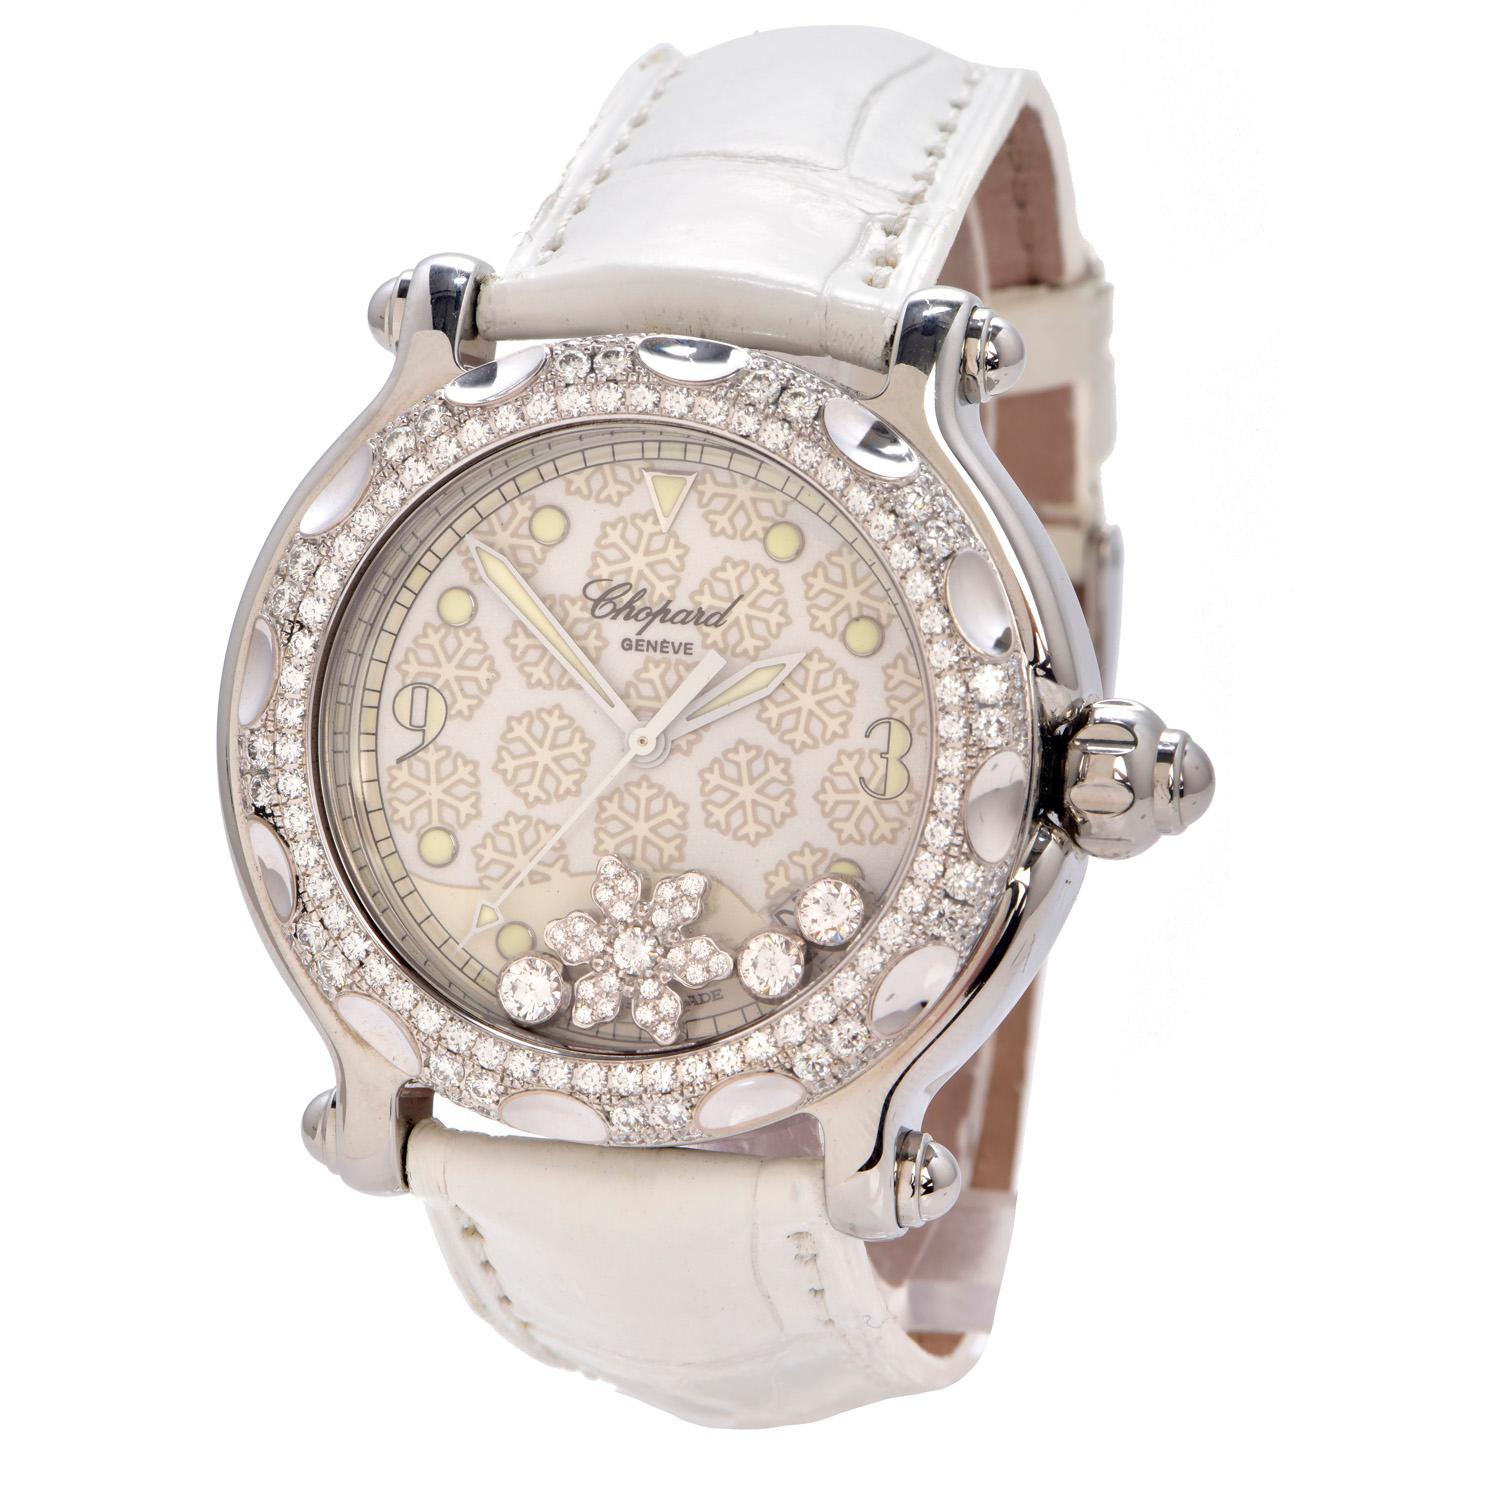 Chopard Happy Sport Diamond snowflake 18K Gold 38 mm Ladies Wristwatch.

Expertly crafted in Steel with an approx total weight of 70.7 grams.

Featuring Dazzling Genuine round Diamonds weighing approximately 2.25 carat  ( F-G color and